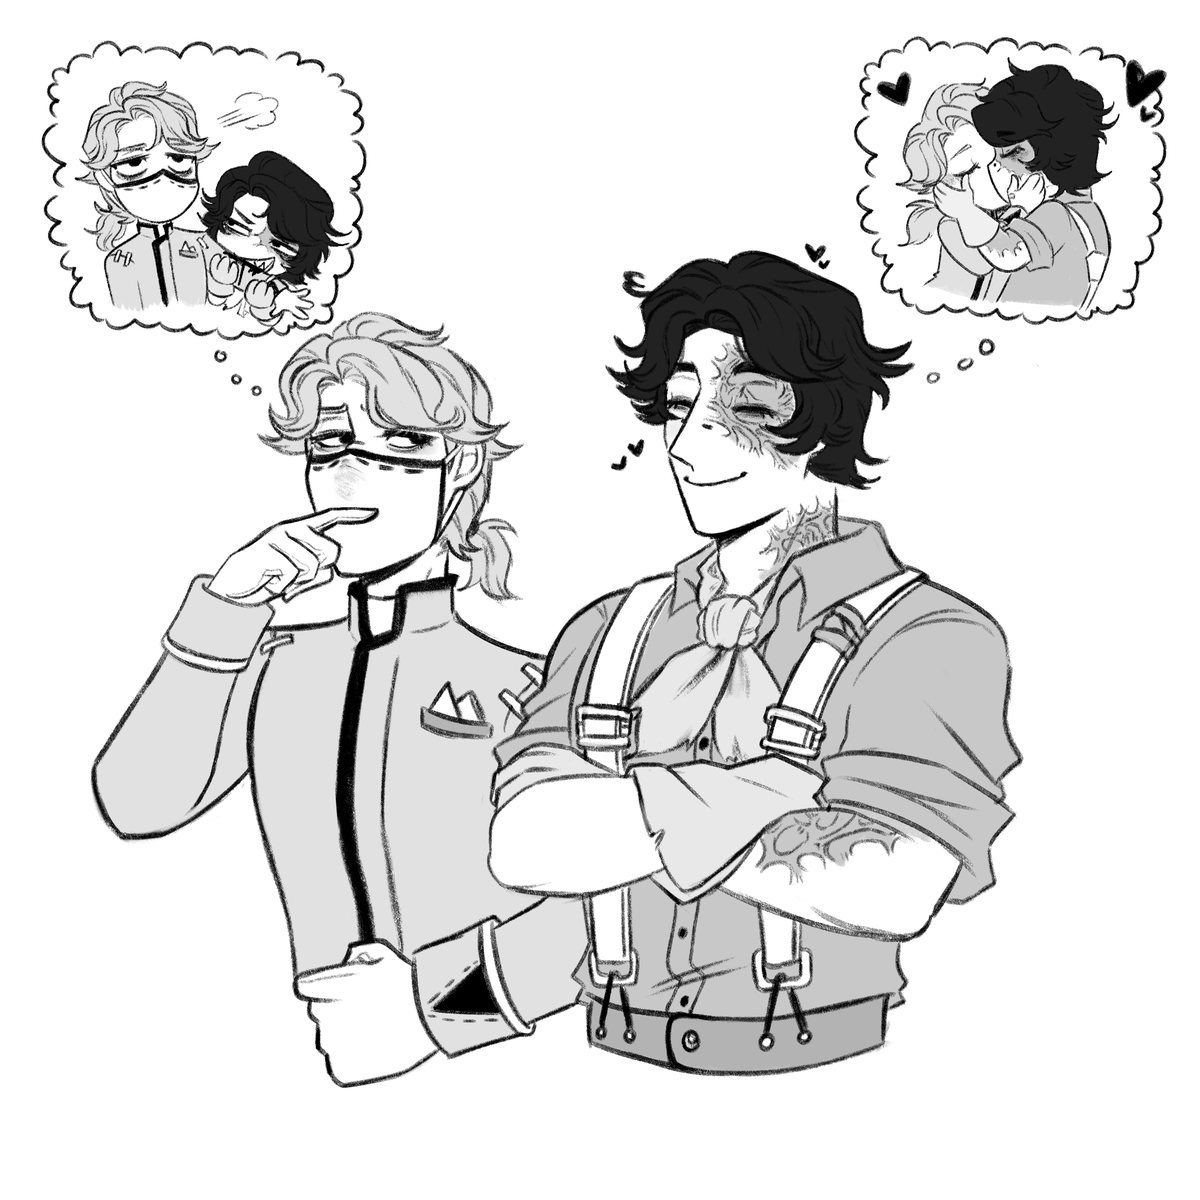 im ashamed to admit the time i spent lining this
-
#idv #identityv #nortsop #aesnort #aesopcarl #nortoncampbell